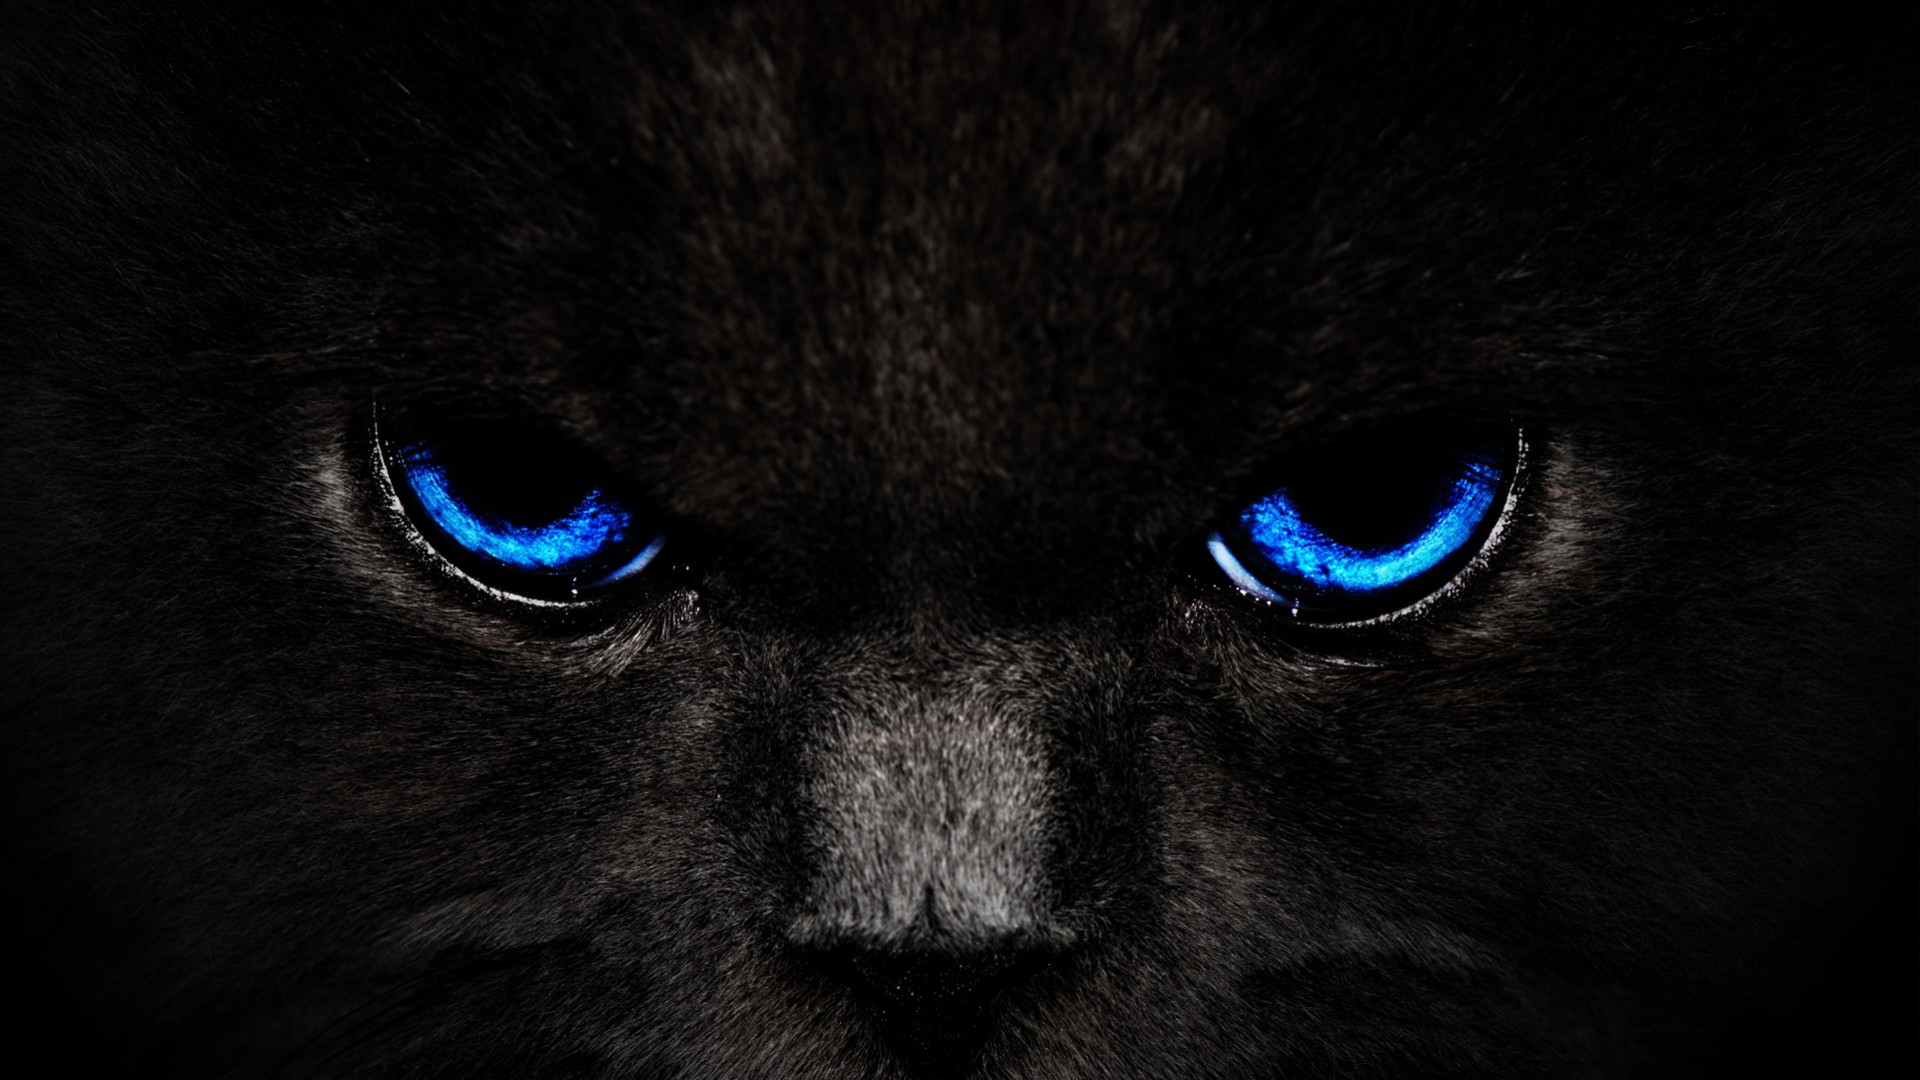 hd black cat wallpapers smart phone background photos download free images  widescreen desktop backgrounds high quality